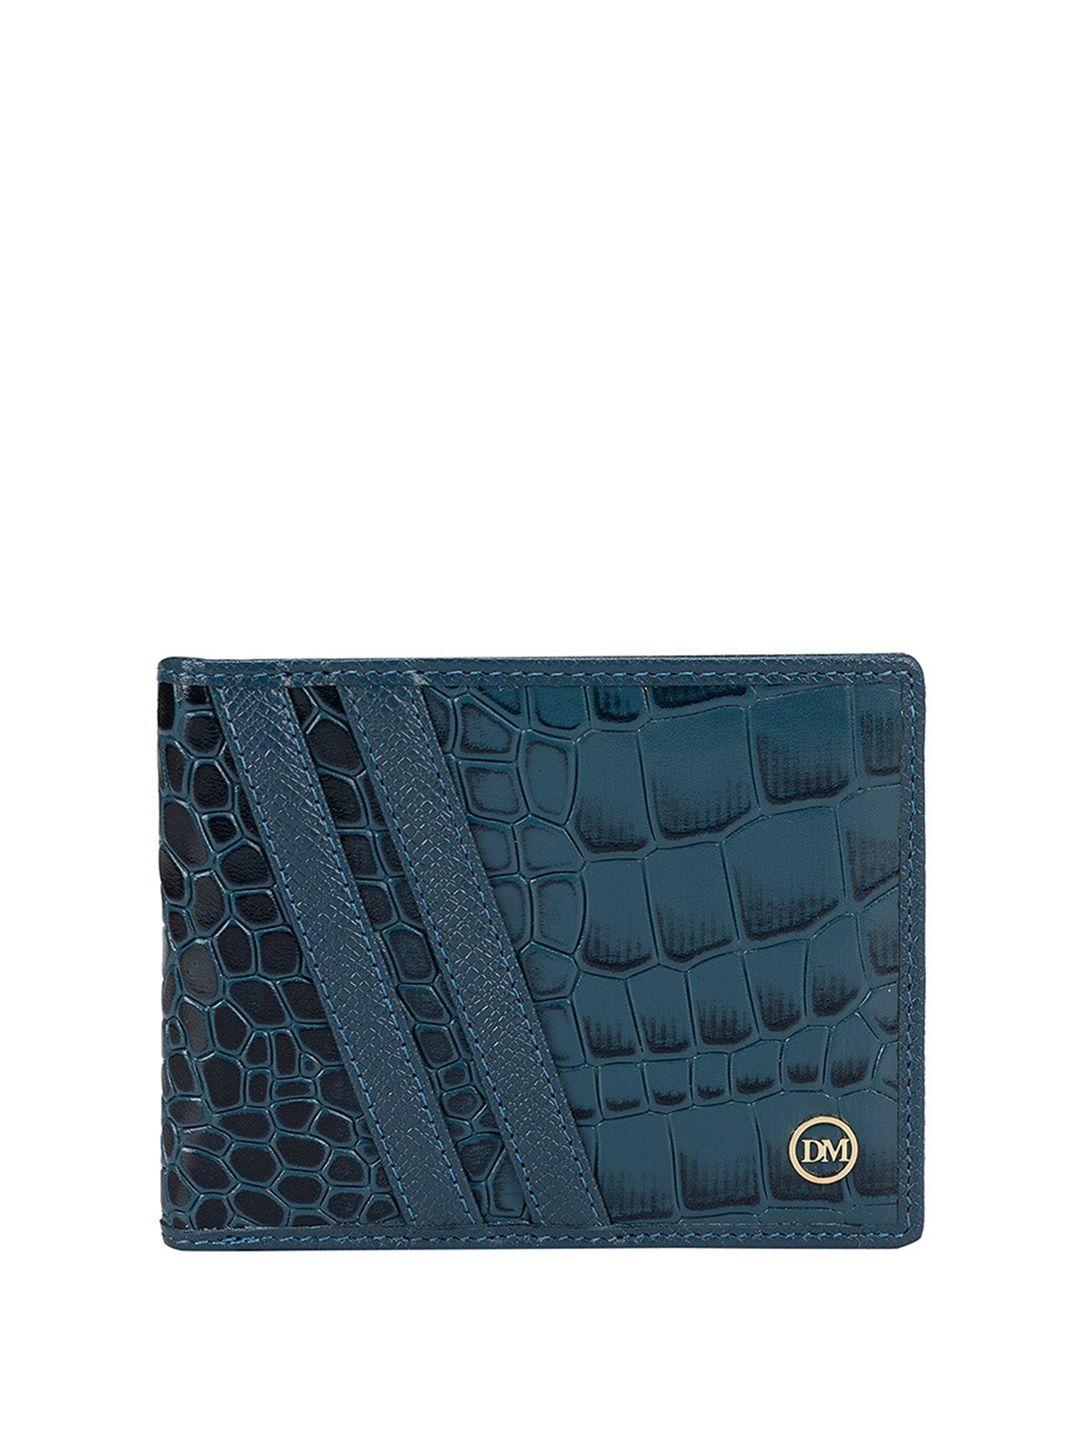 da milano abstract textured leather two fold wallet